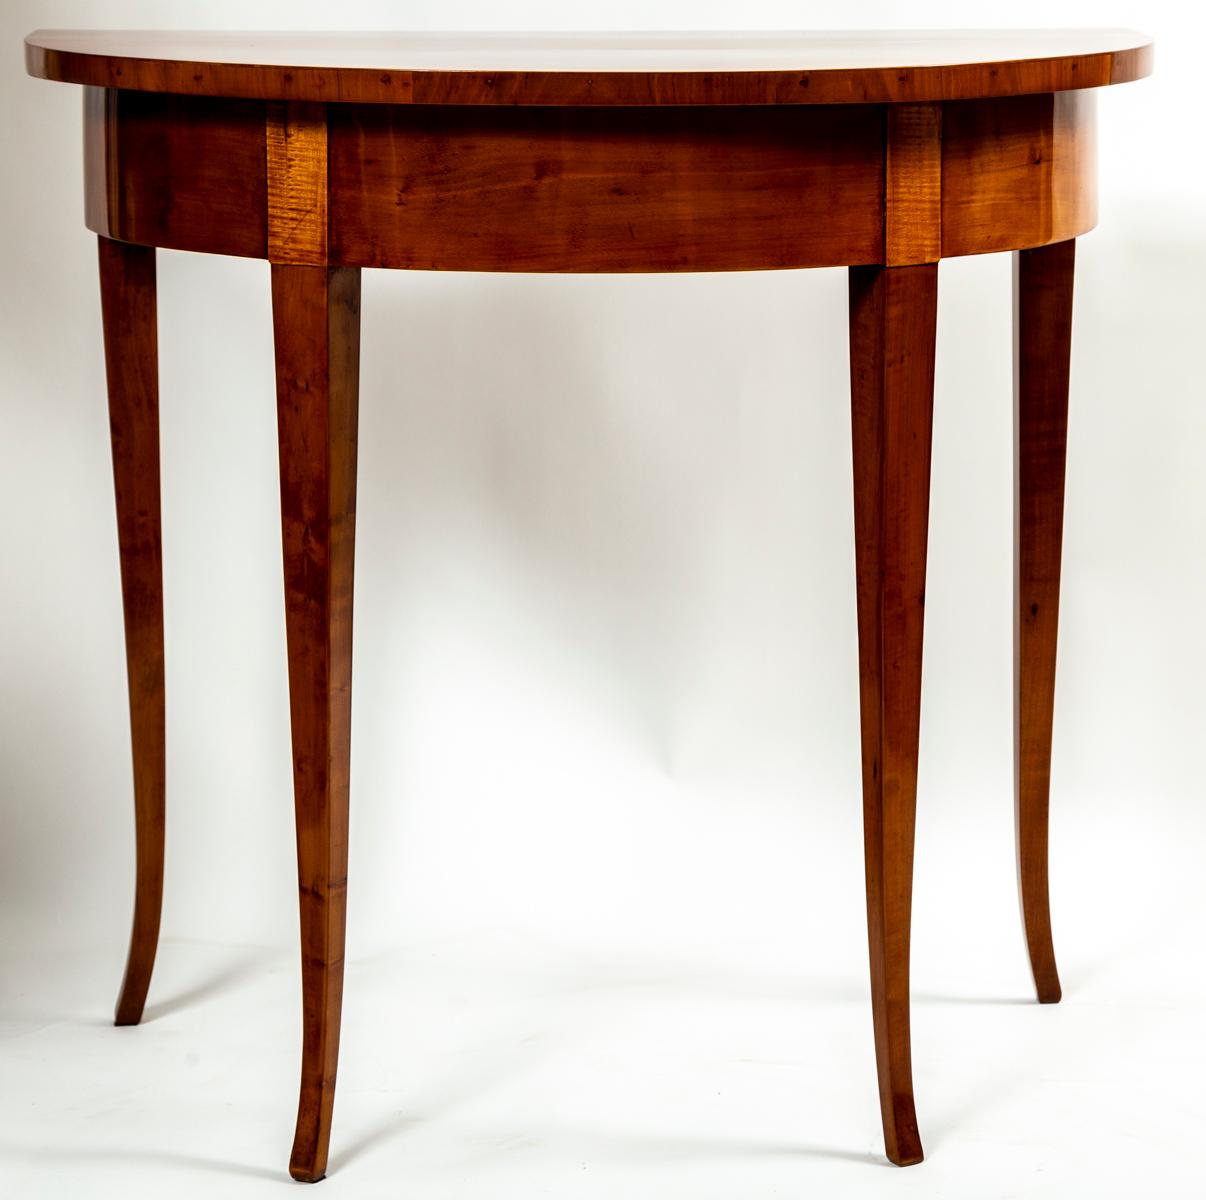 An elegantly proportioned single Biedermeier Demilune shaped console table finishing on sleek tapered legs in pearwood veneer

Origin: Austria

Dating: 1820ca

Condition: Excellent sturdy condition, re -French polished

Dimensions: 30.5″ high, 33″